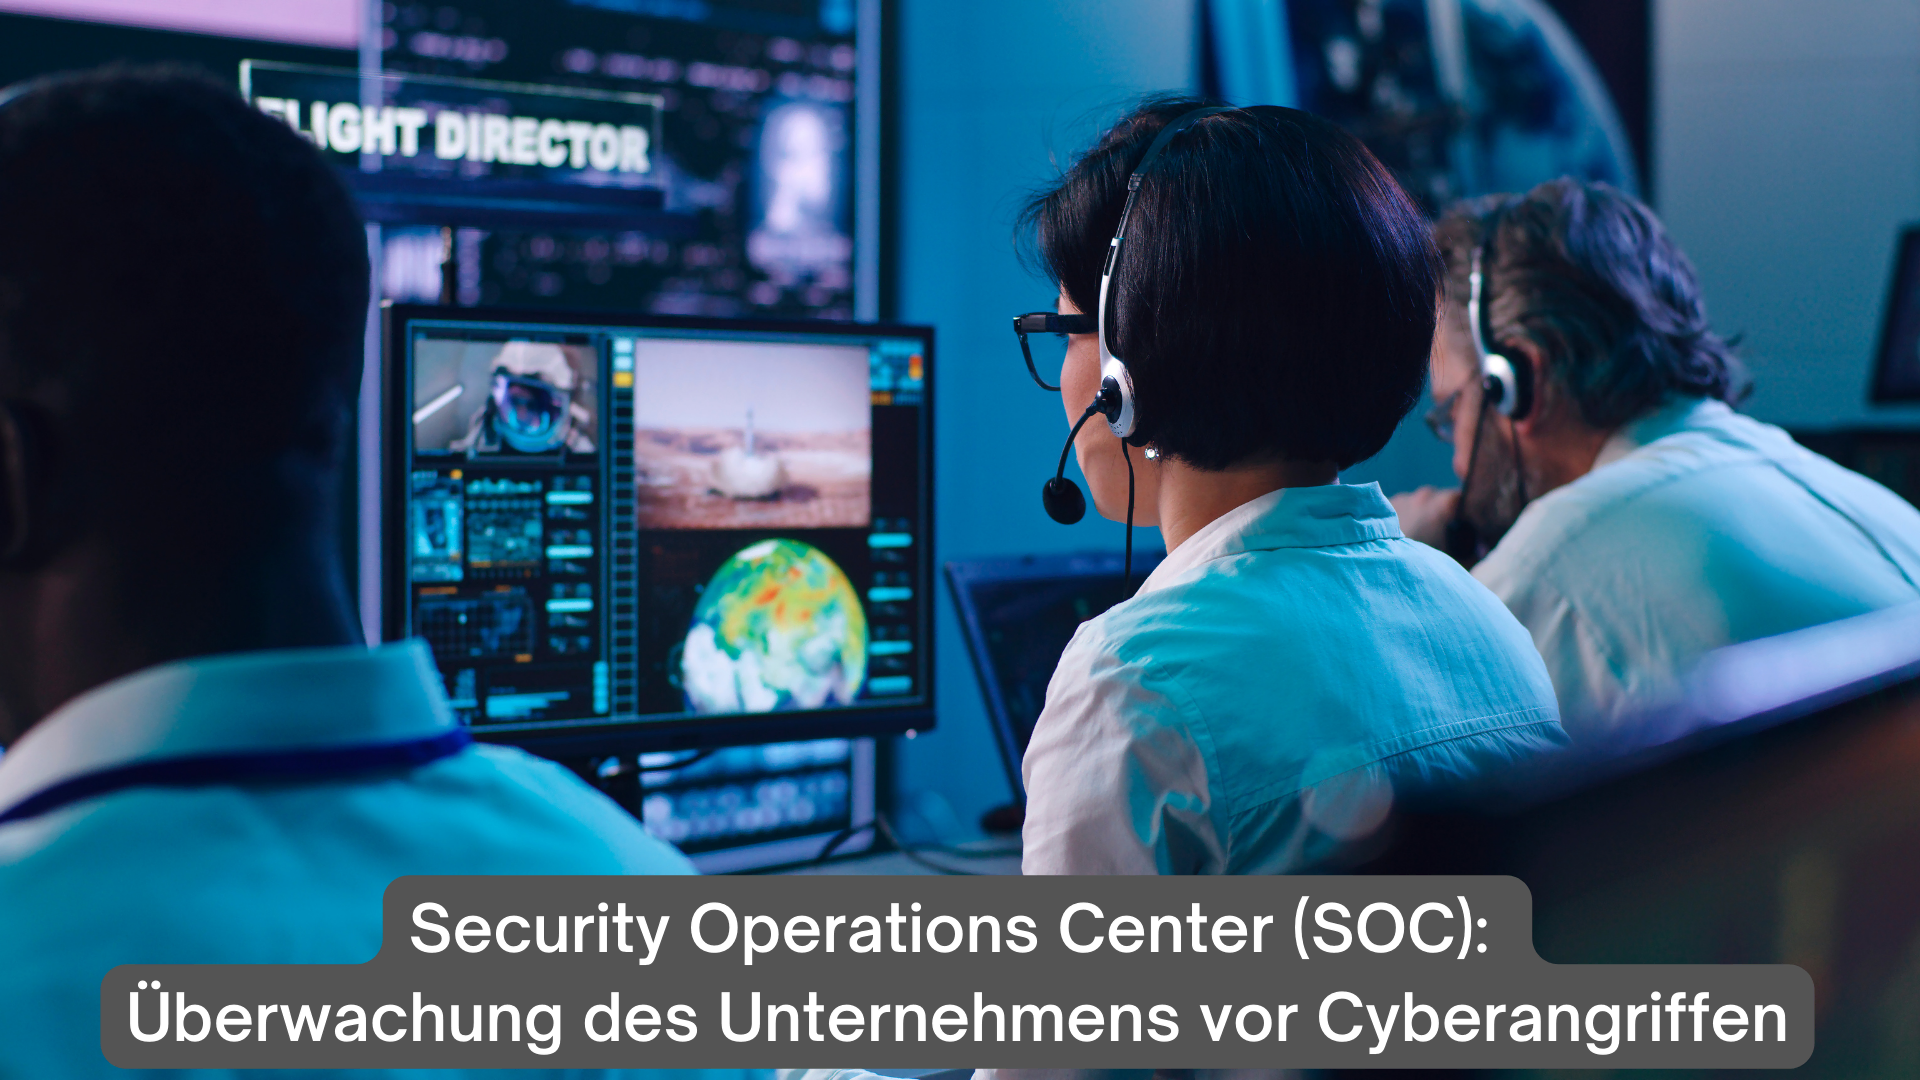 Security Operations Center (SOC) was ist das?